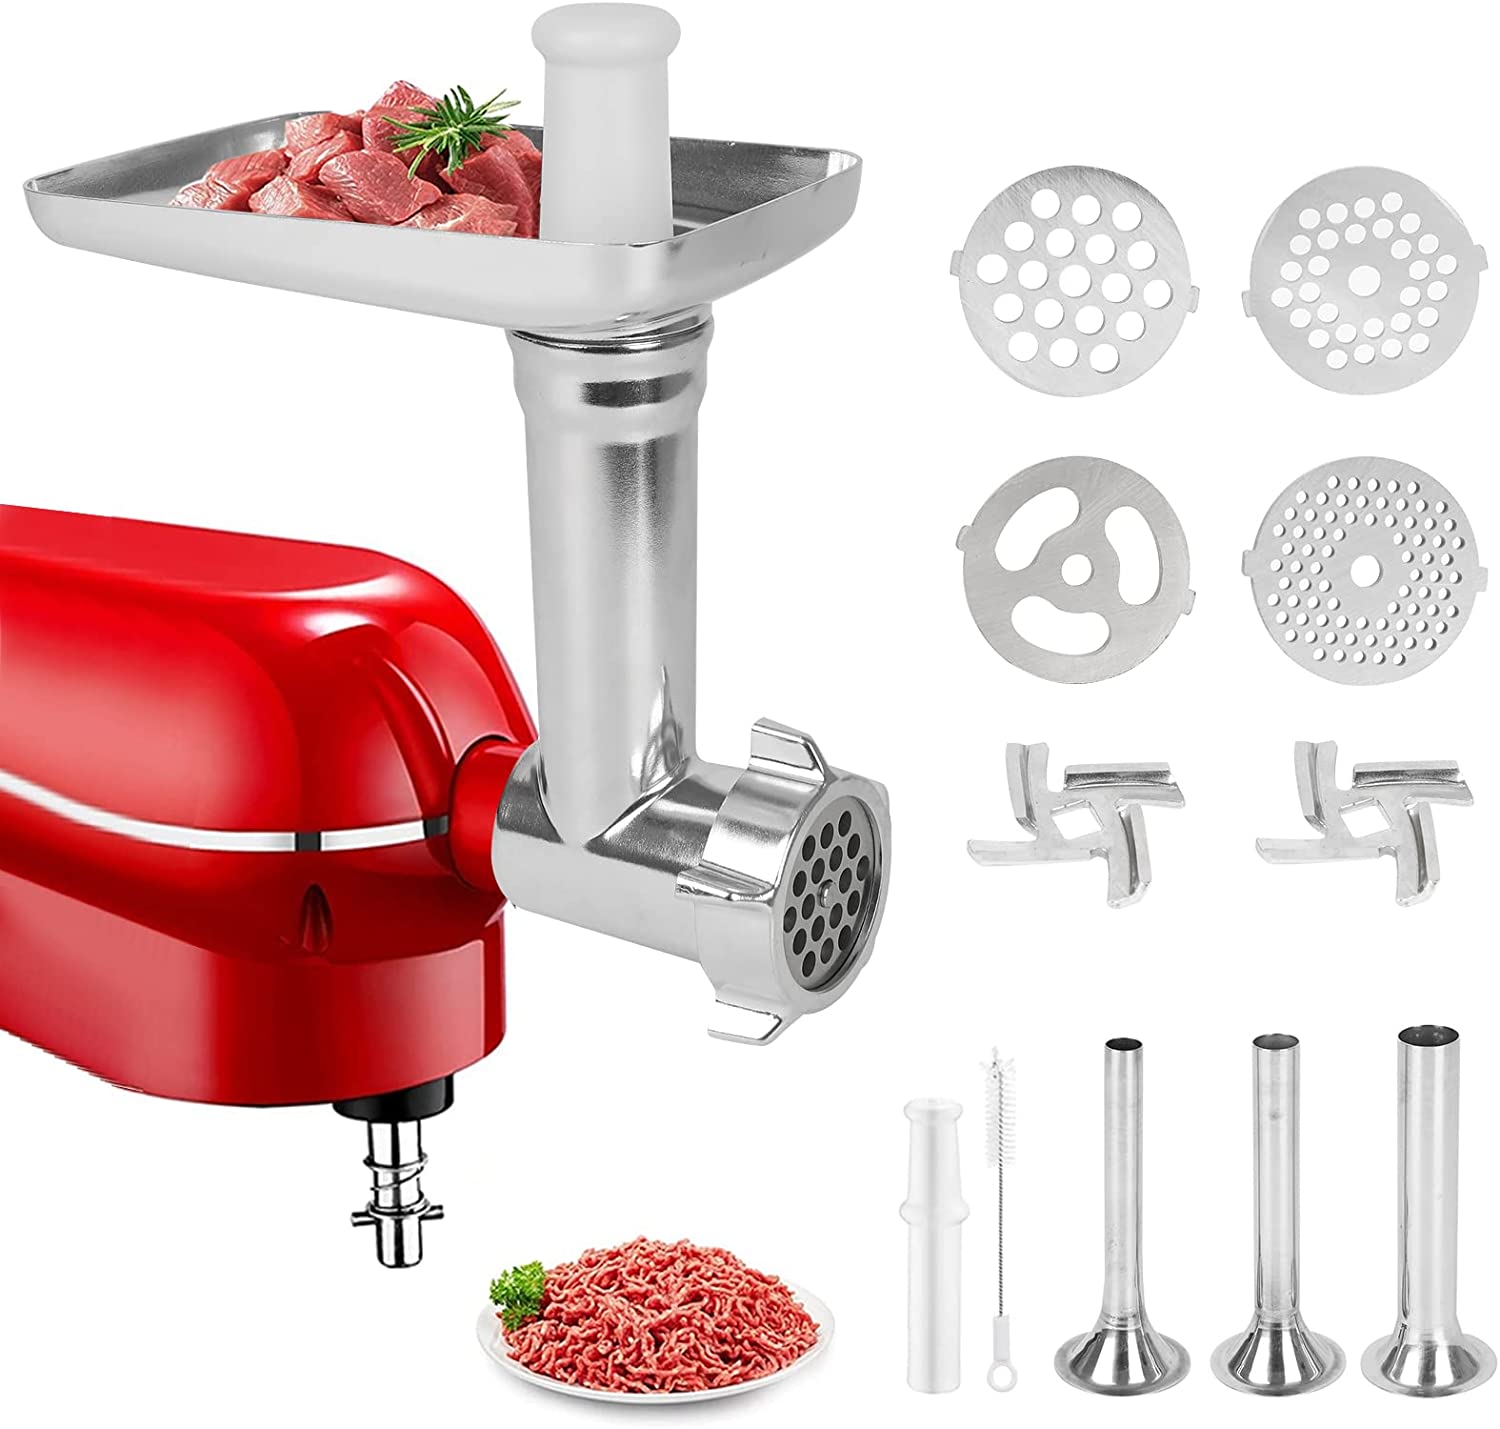 Meat Grinder Attachment for Kitchen Aid Accessories, Meat Grinder, Sausage Filler, Stainless Steel Stuffer Accessories, Meat Mincer, Electric Accessories, Filling Pipes, Funnel Nozzles, Kneading Machine, Filling Tubes (A)